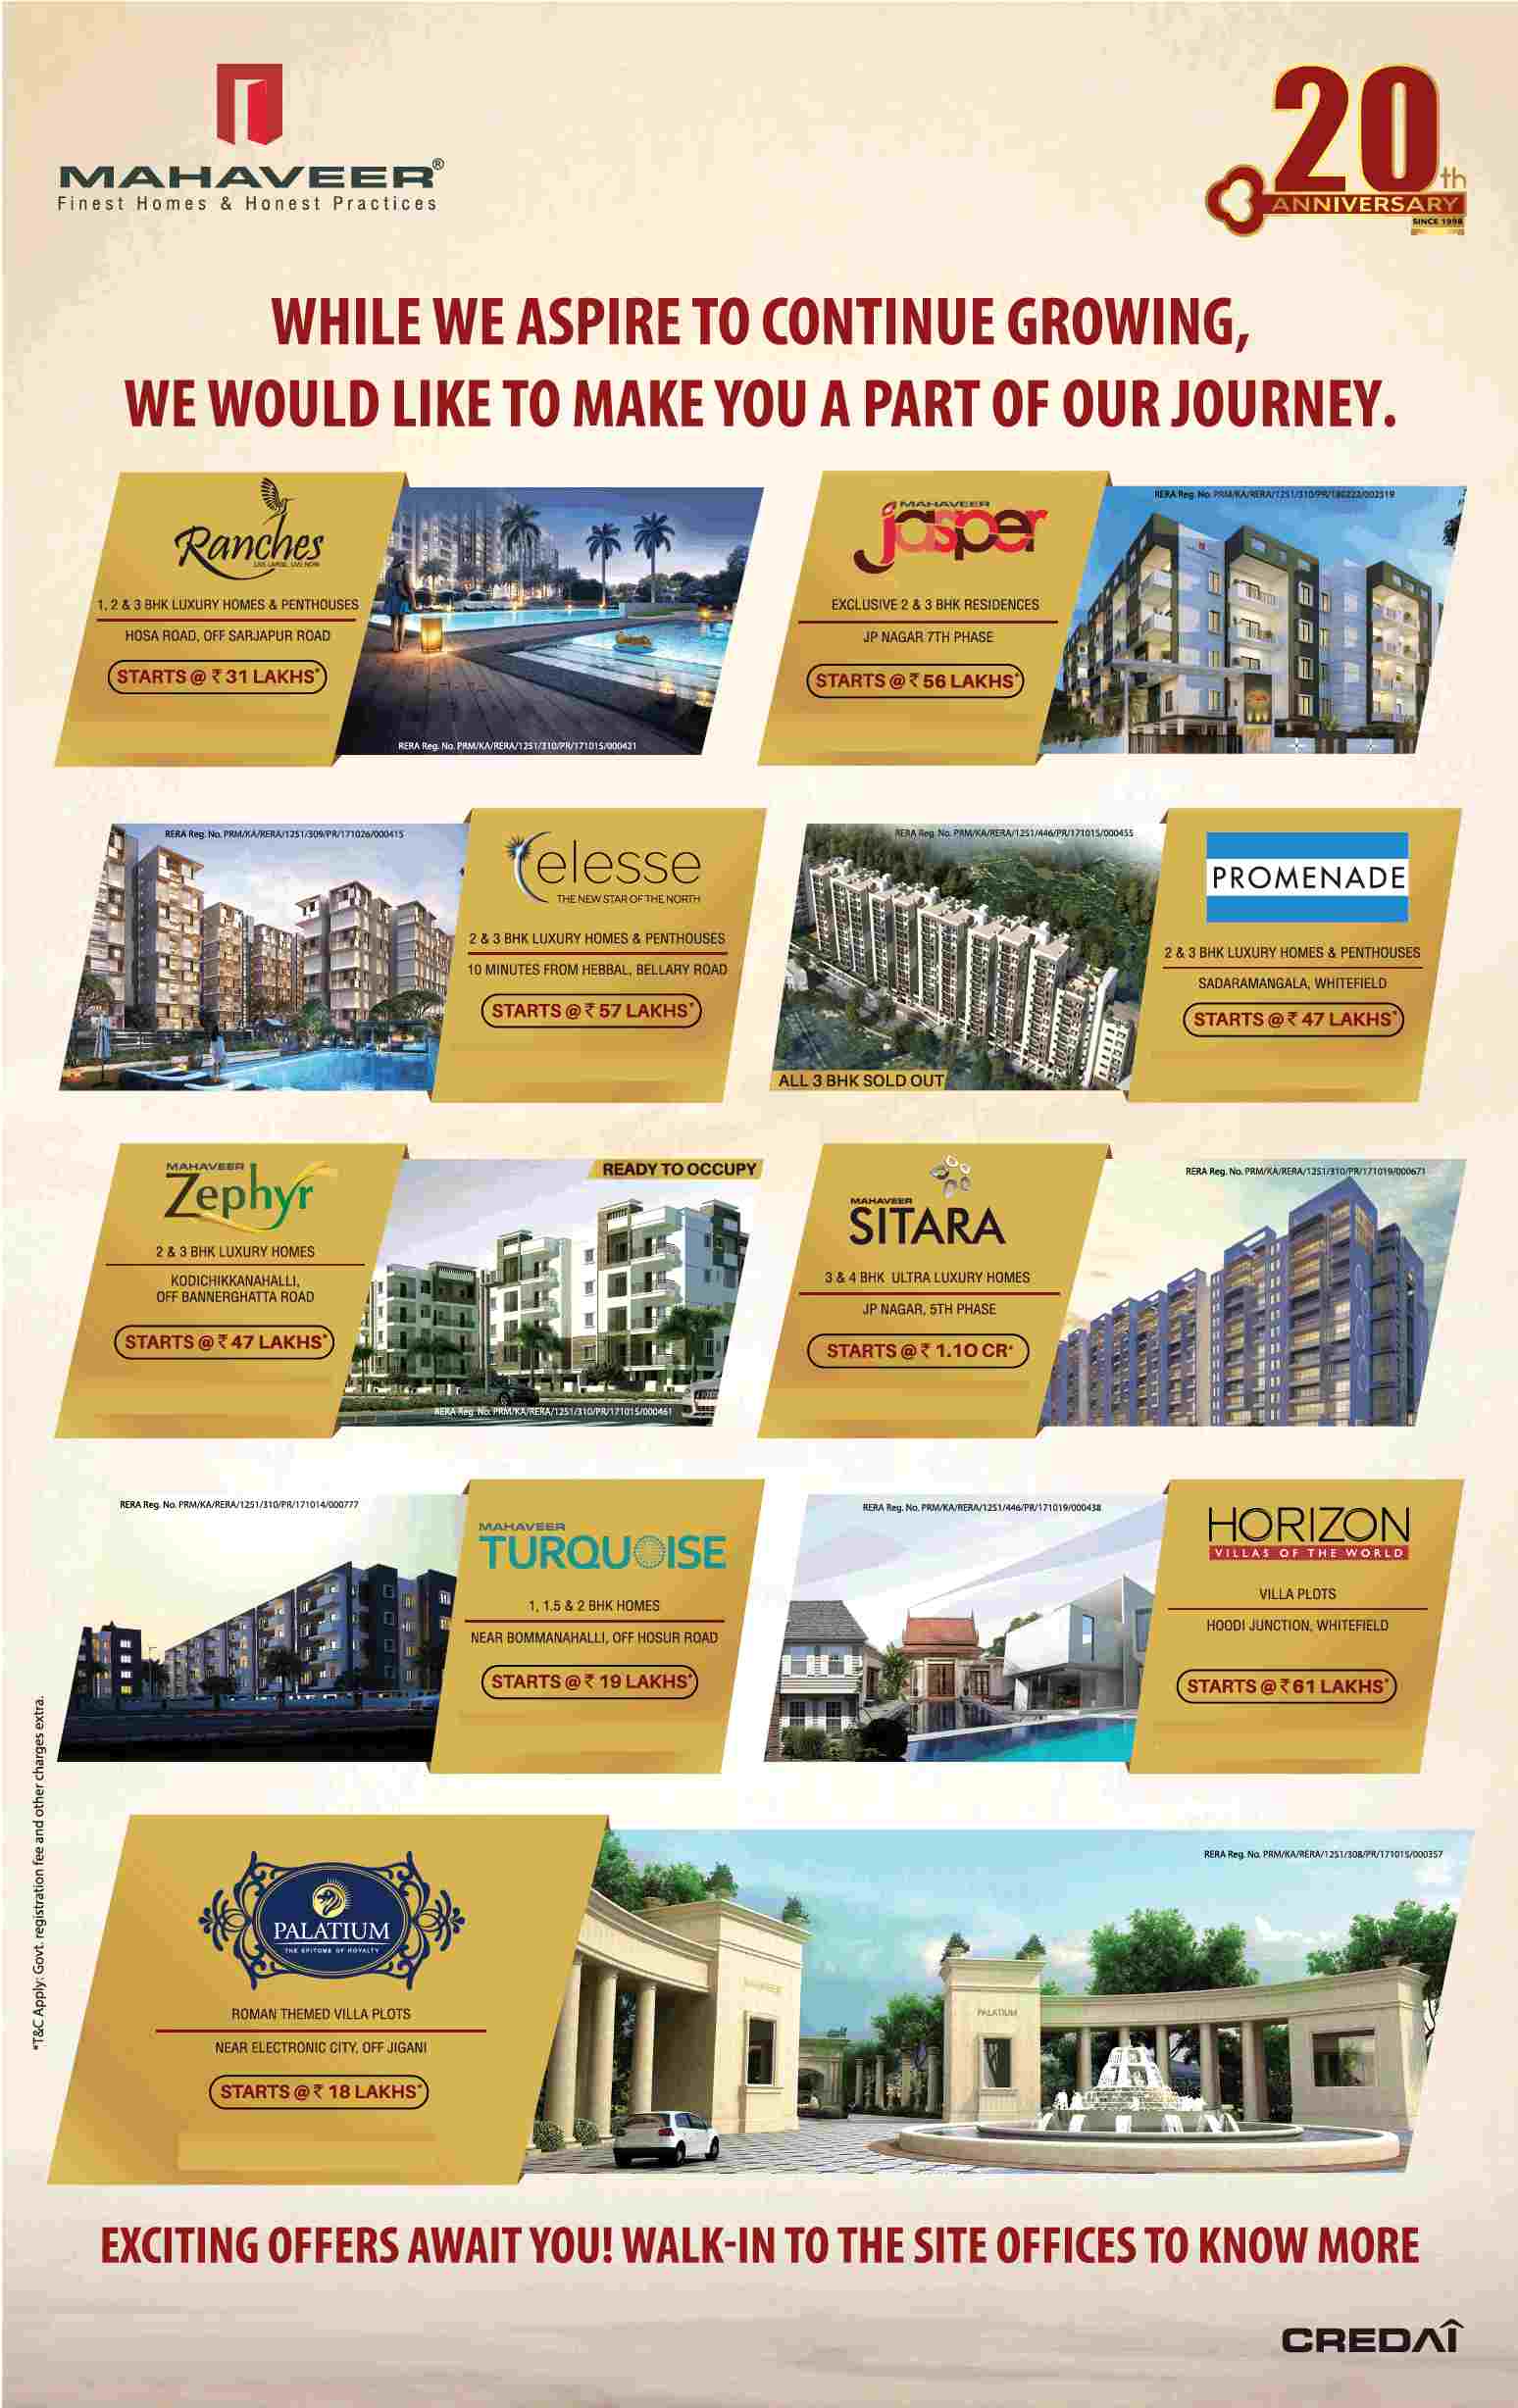 Invest in Mahaveer properties and avail exciting offers